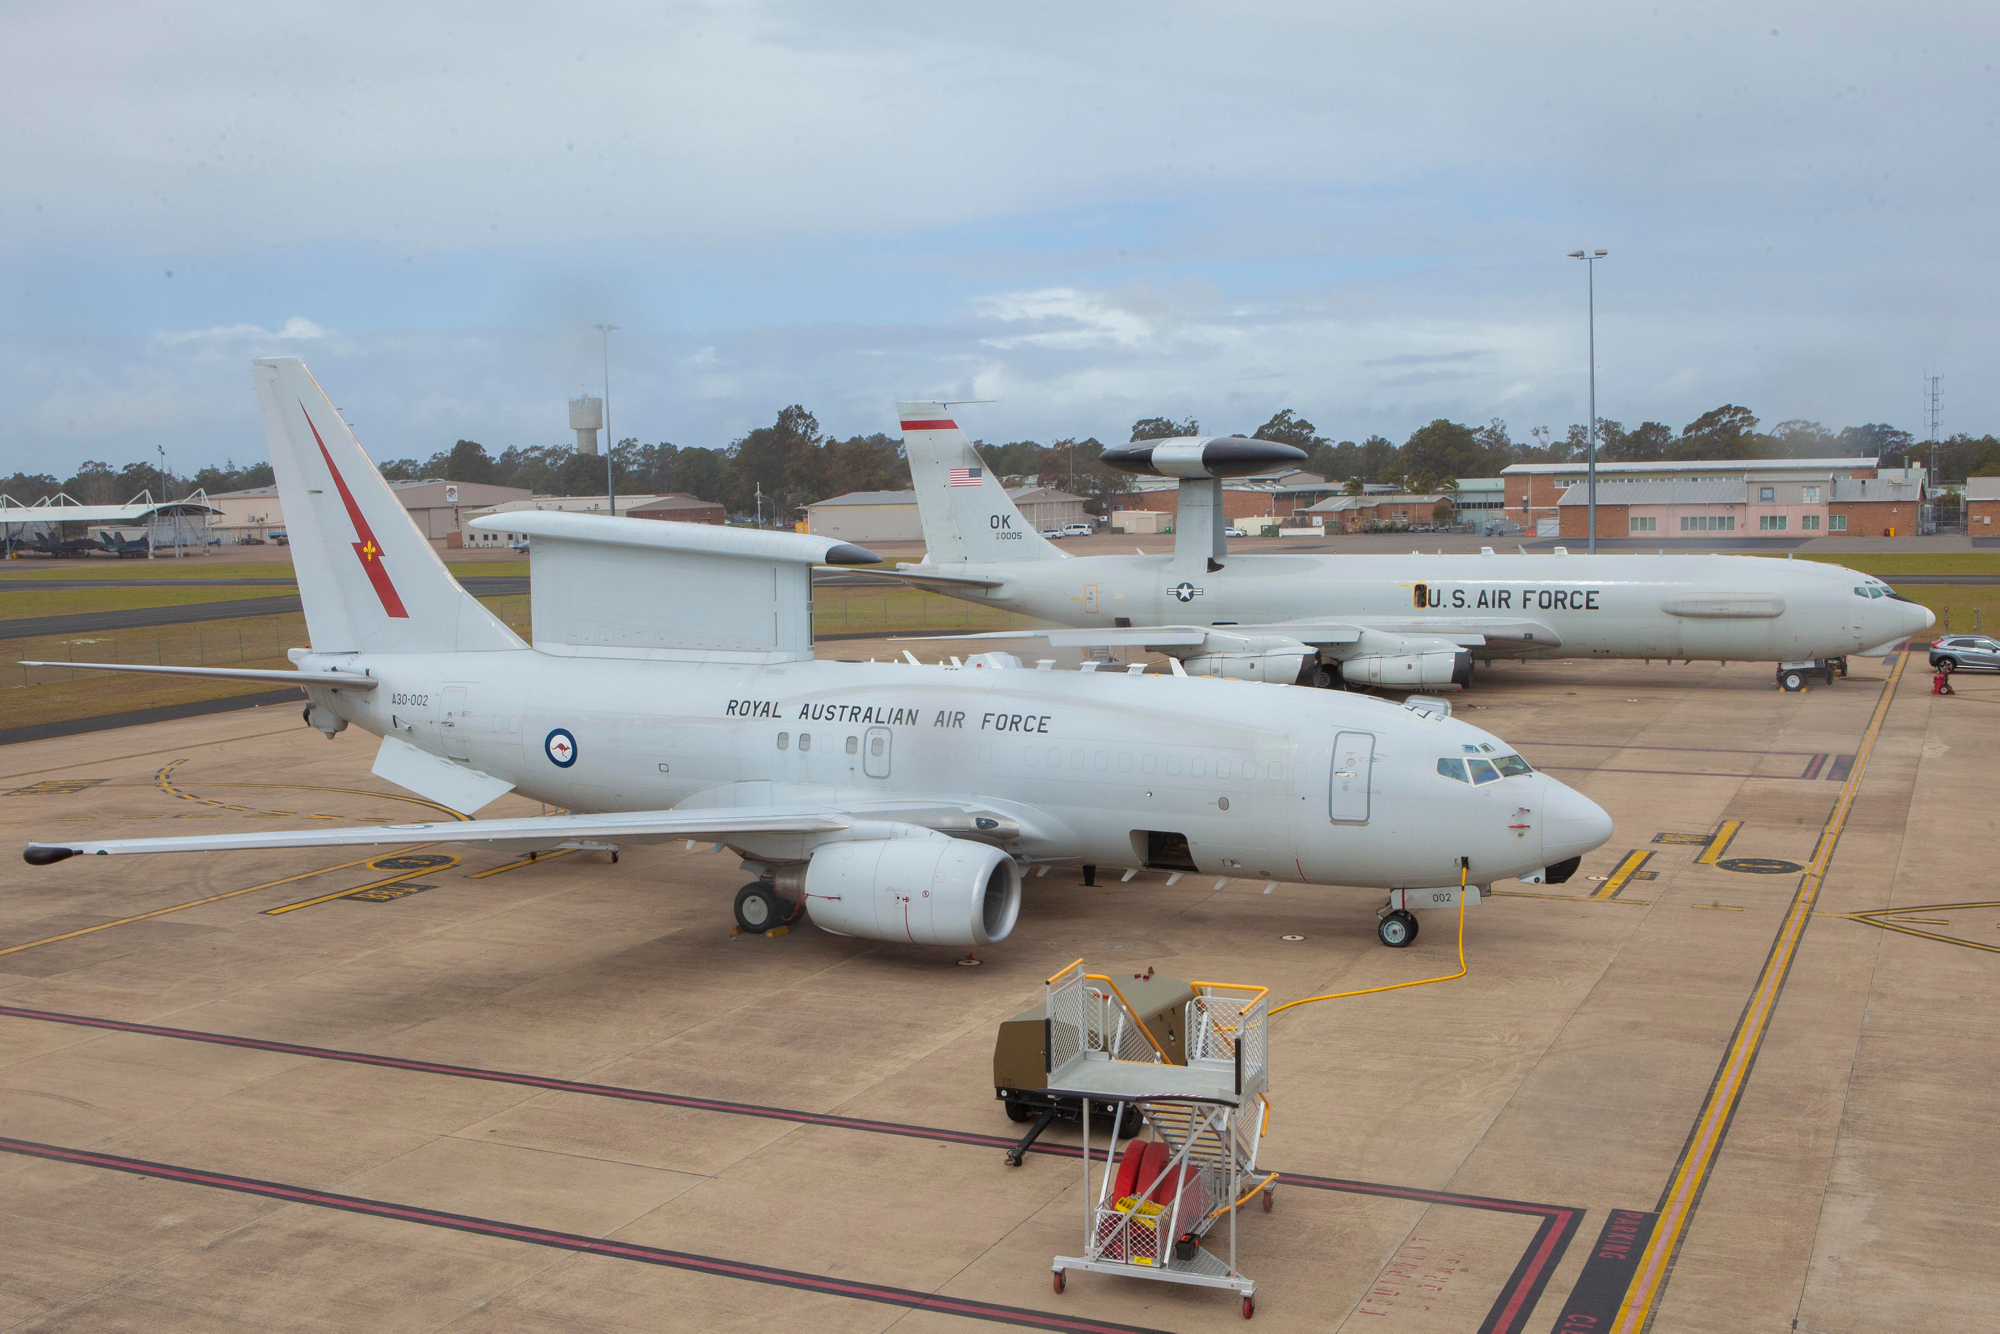 A RAAF E-7A Wedgetail and USAF E-3 Sentry sit side by side at RAAF Williamtown.